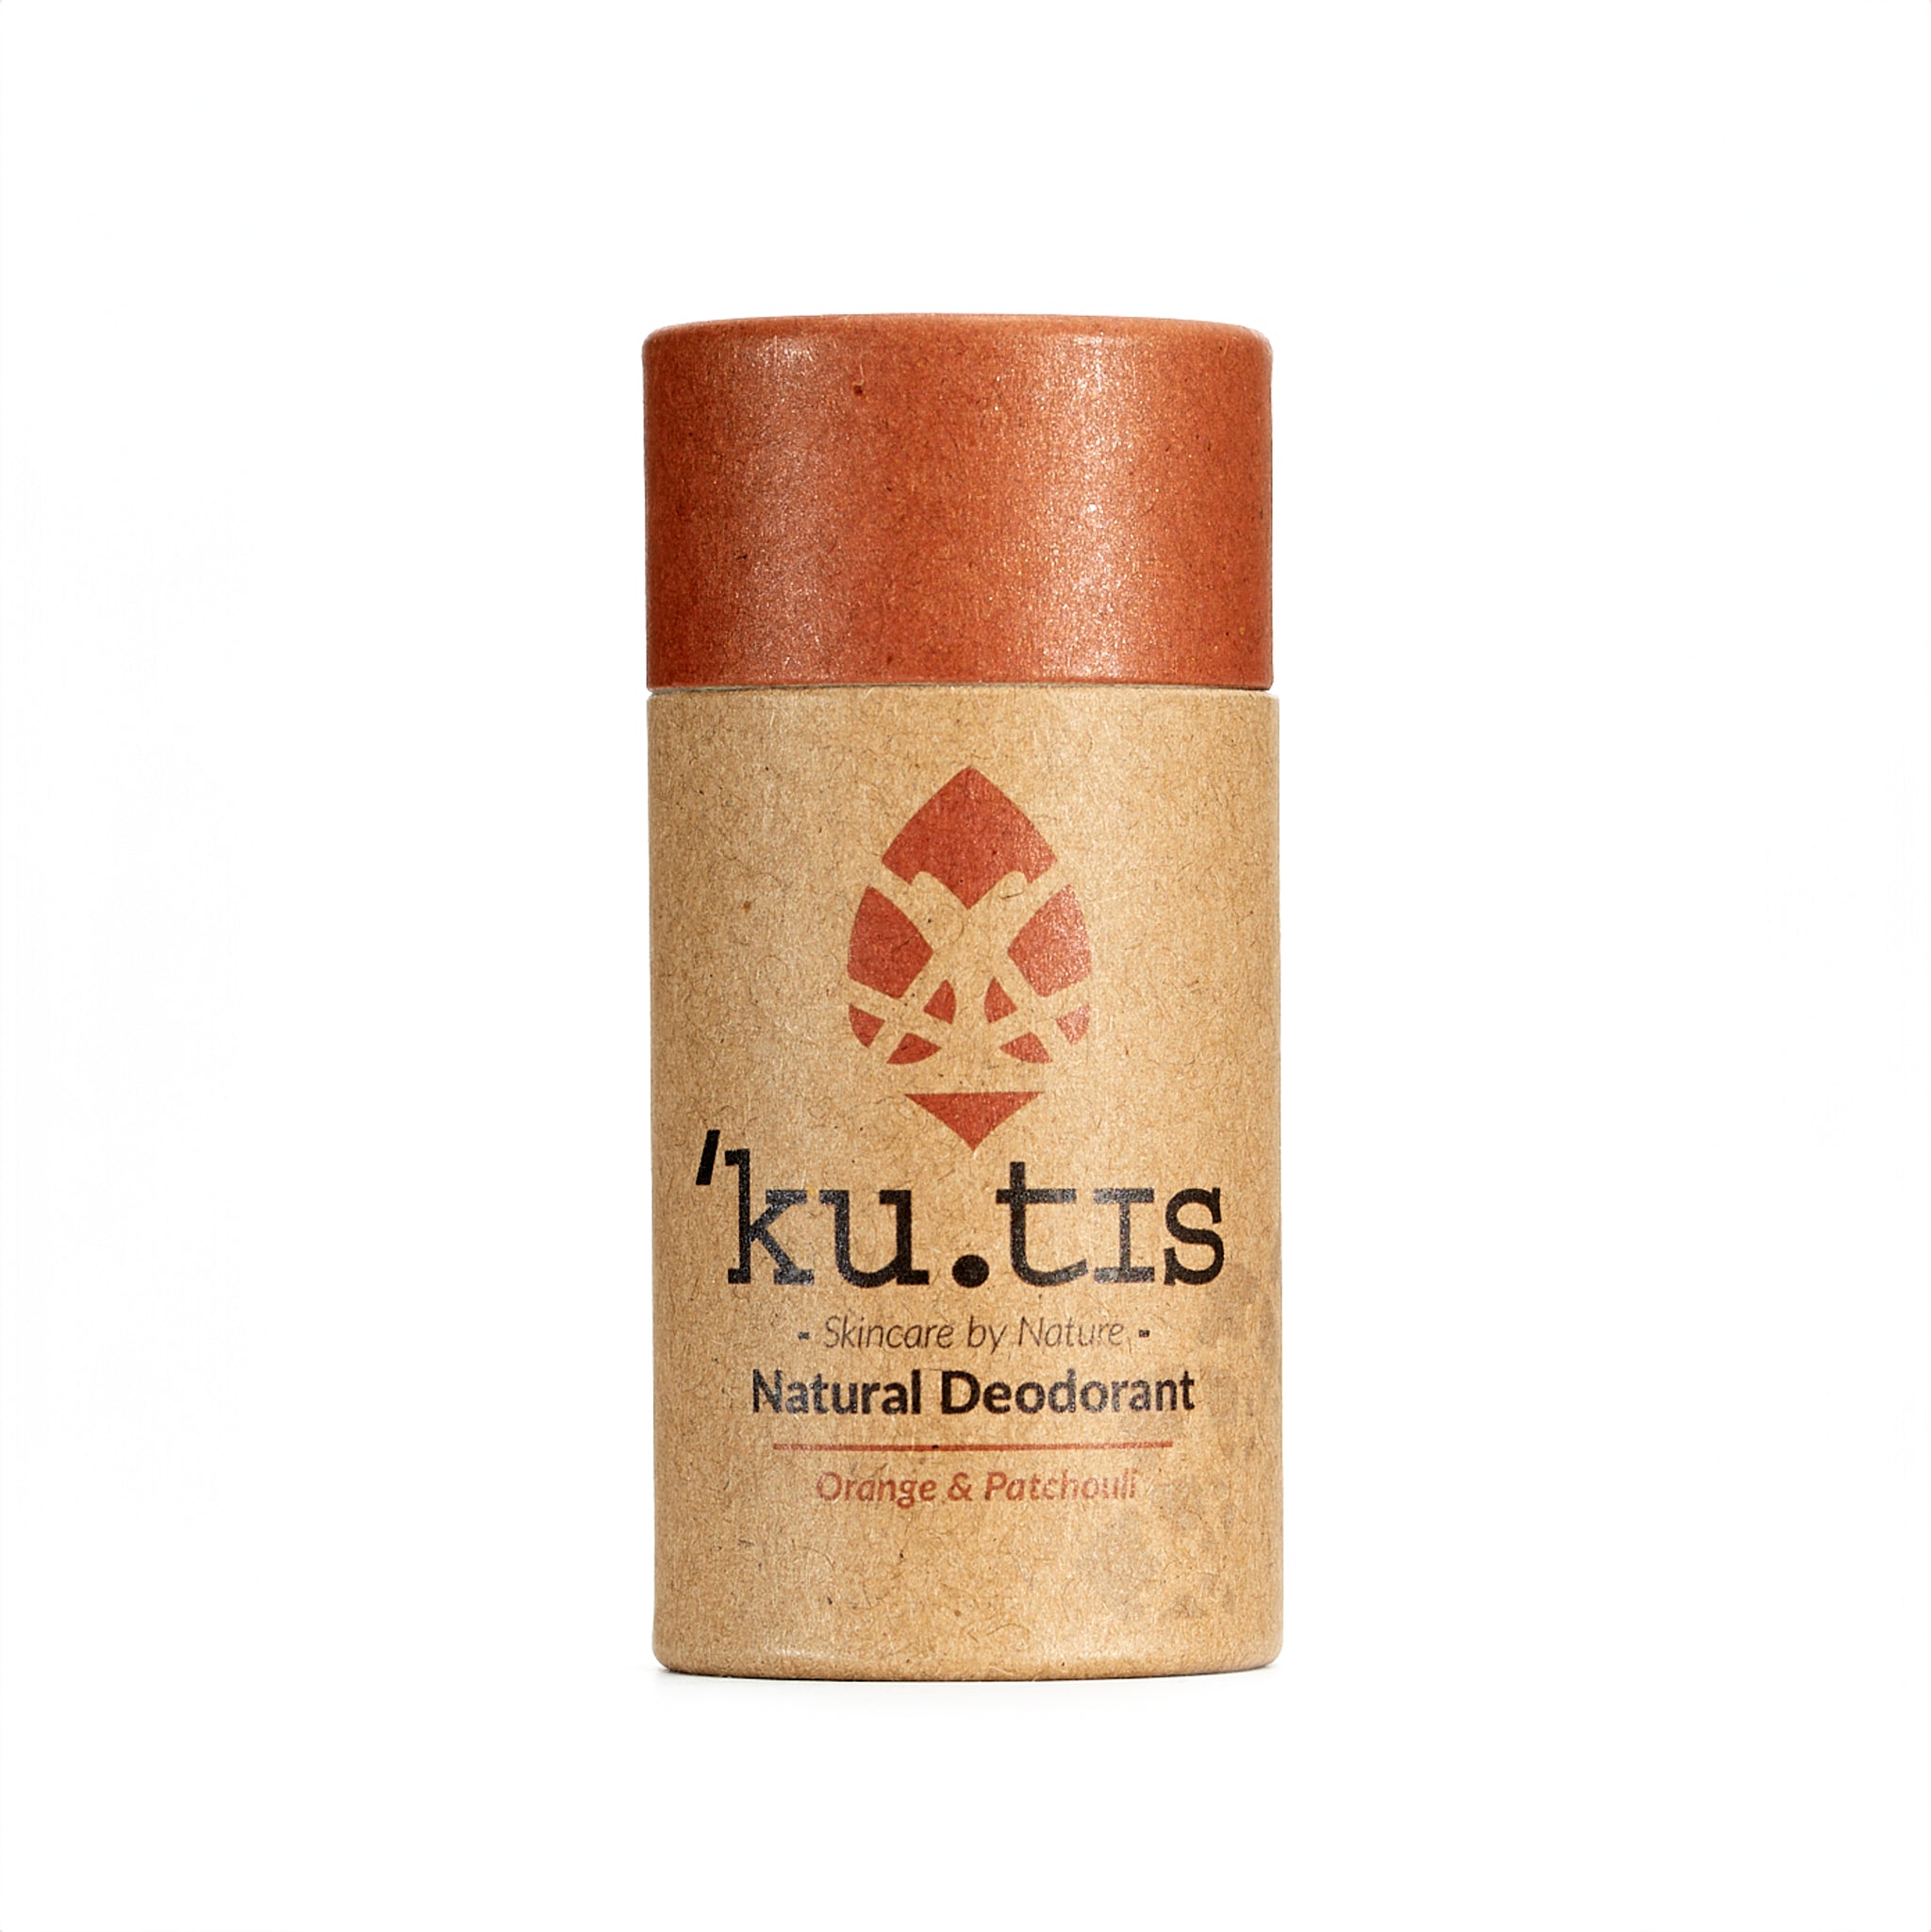 Natural orange and patchouli deodorant stick packaged in an eco friendly cardboard push up tube.